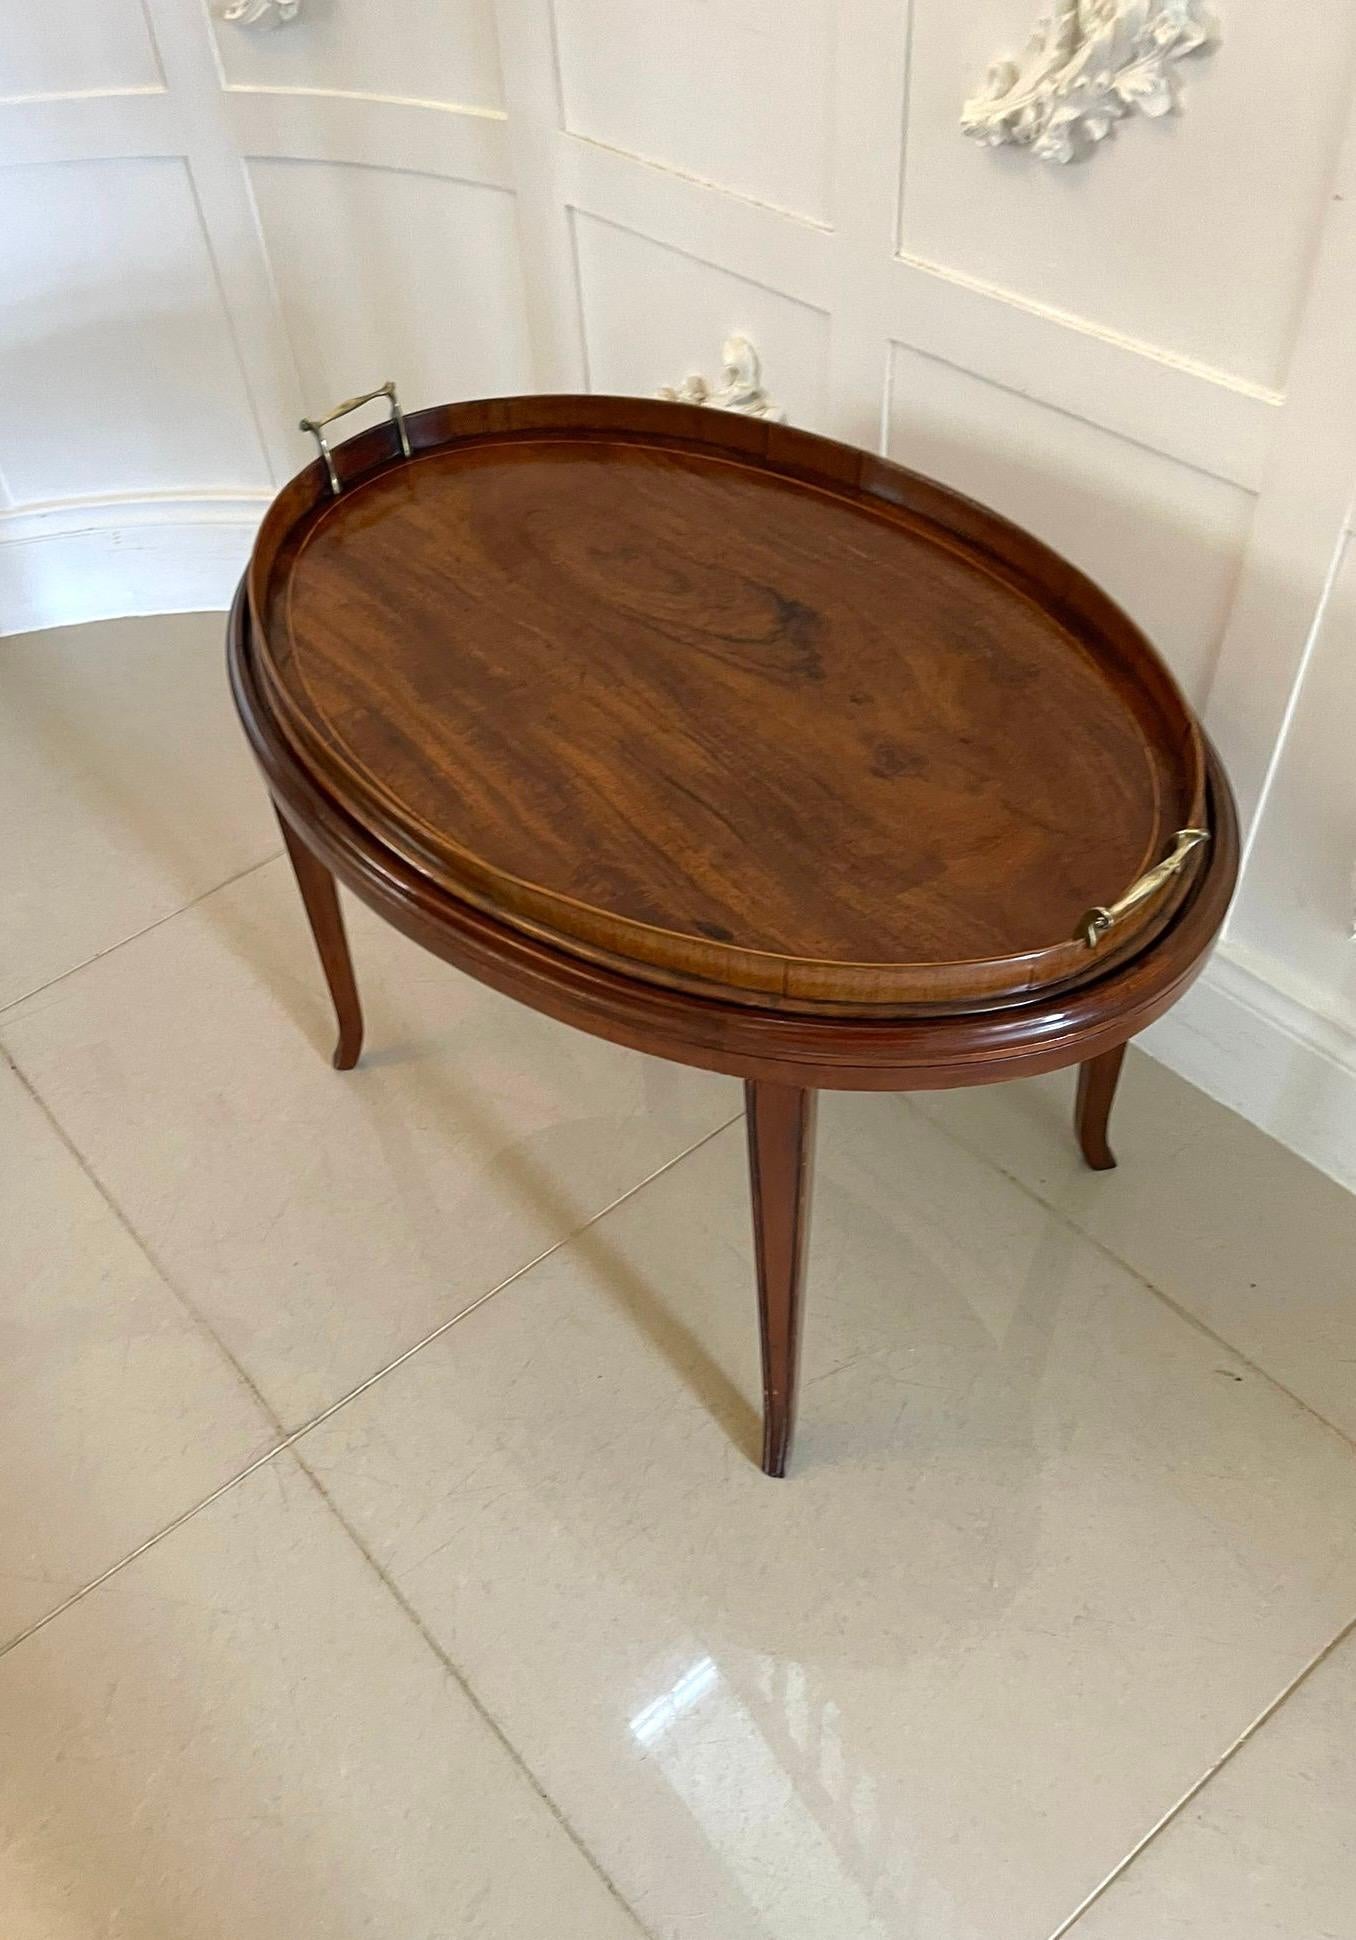 Large Antique Edwardian Oval Quality Figured Mahogany Tea Tray on Stand  For Sale 5